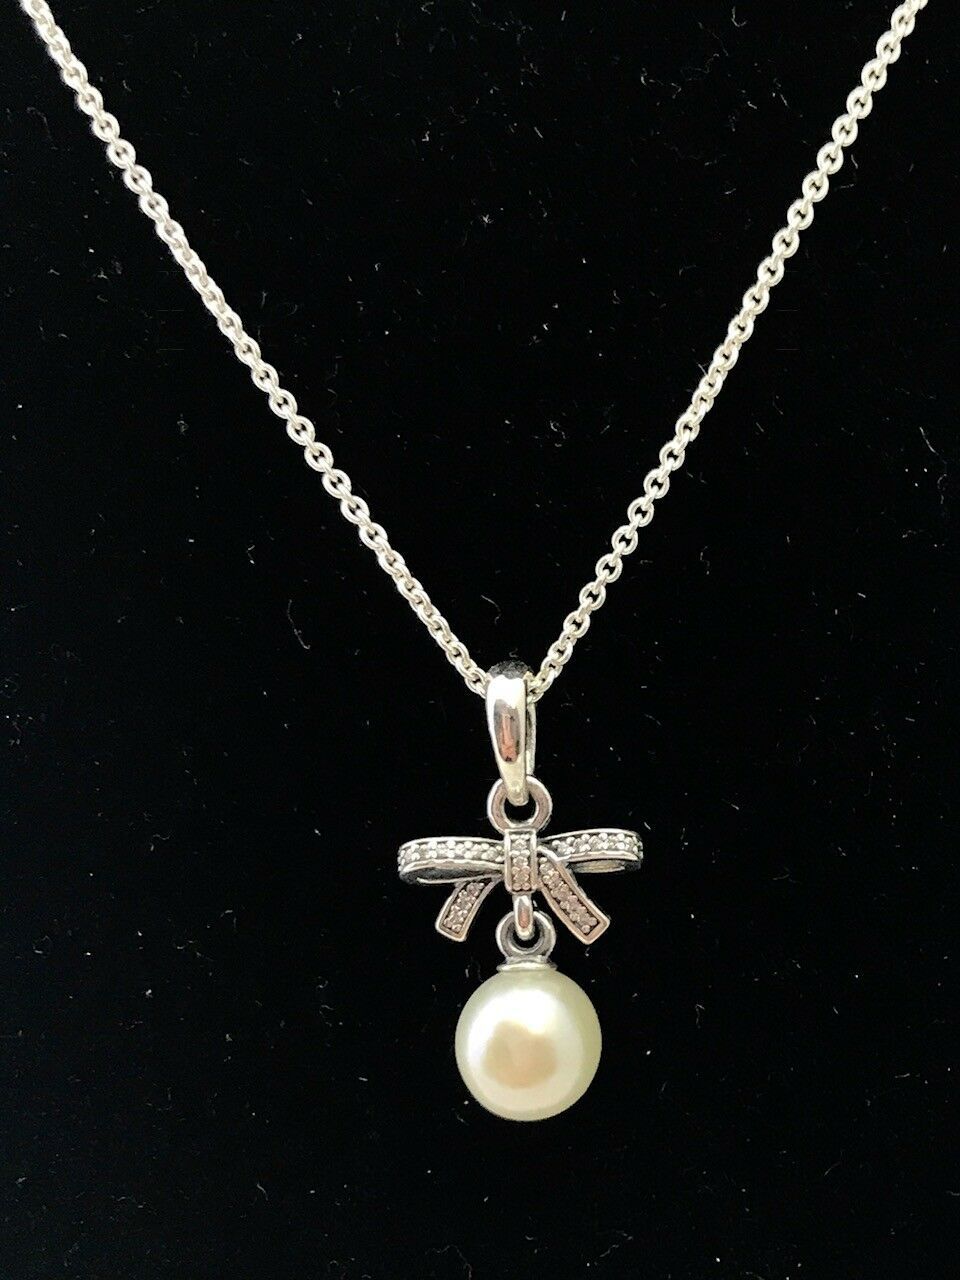 Primary image for Authentic PANDORA Delicate Sentiments White Pearl & Clear CZ Necklace 390380P-70